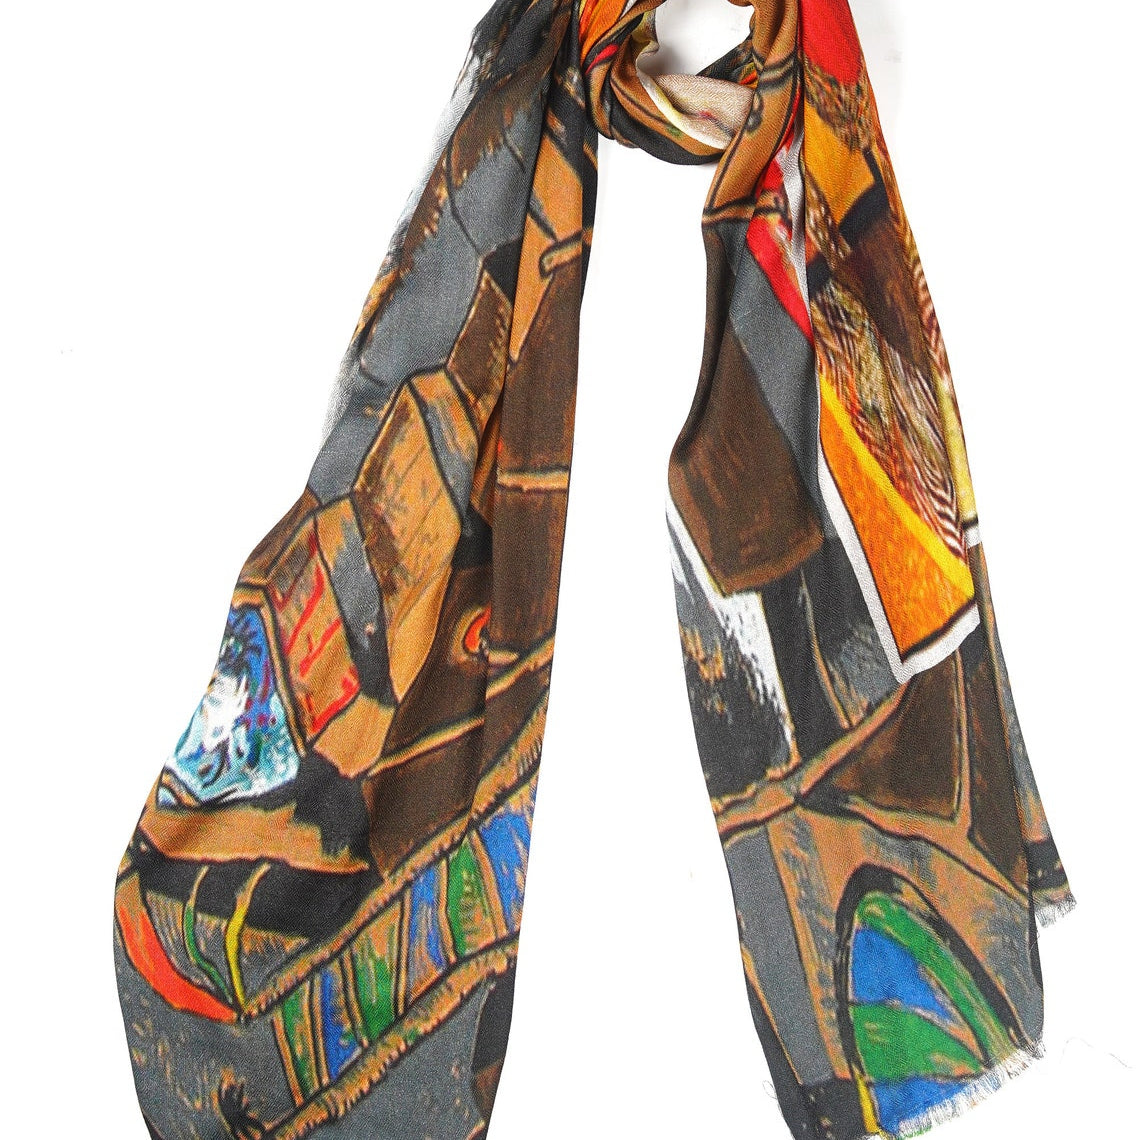 Silk Modal Scarf, long all season scarf in luxurious fabric blend, shawl and wrap, accessories for women, gifts for her, summer scarf, shawl - Grey/Brown